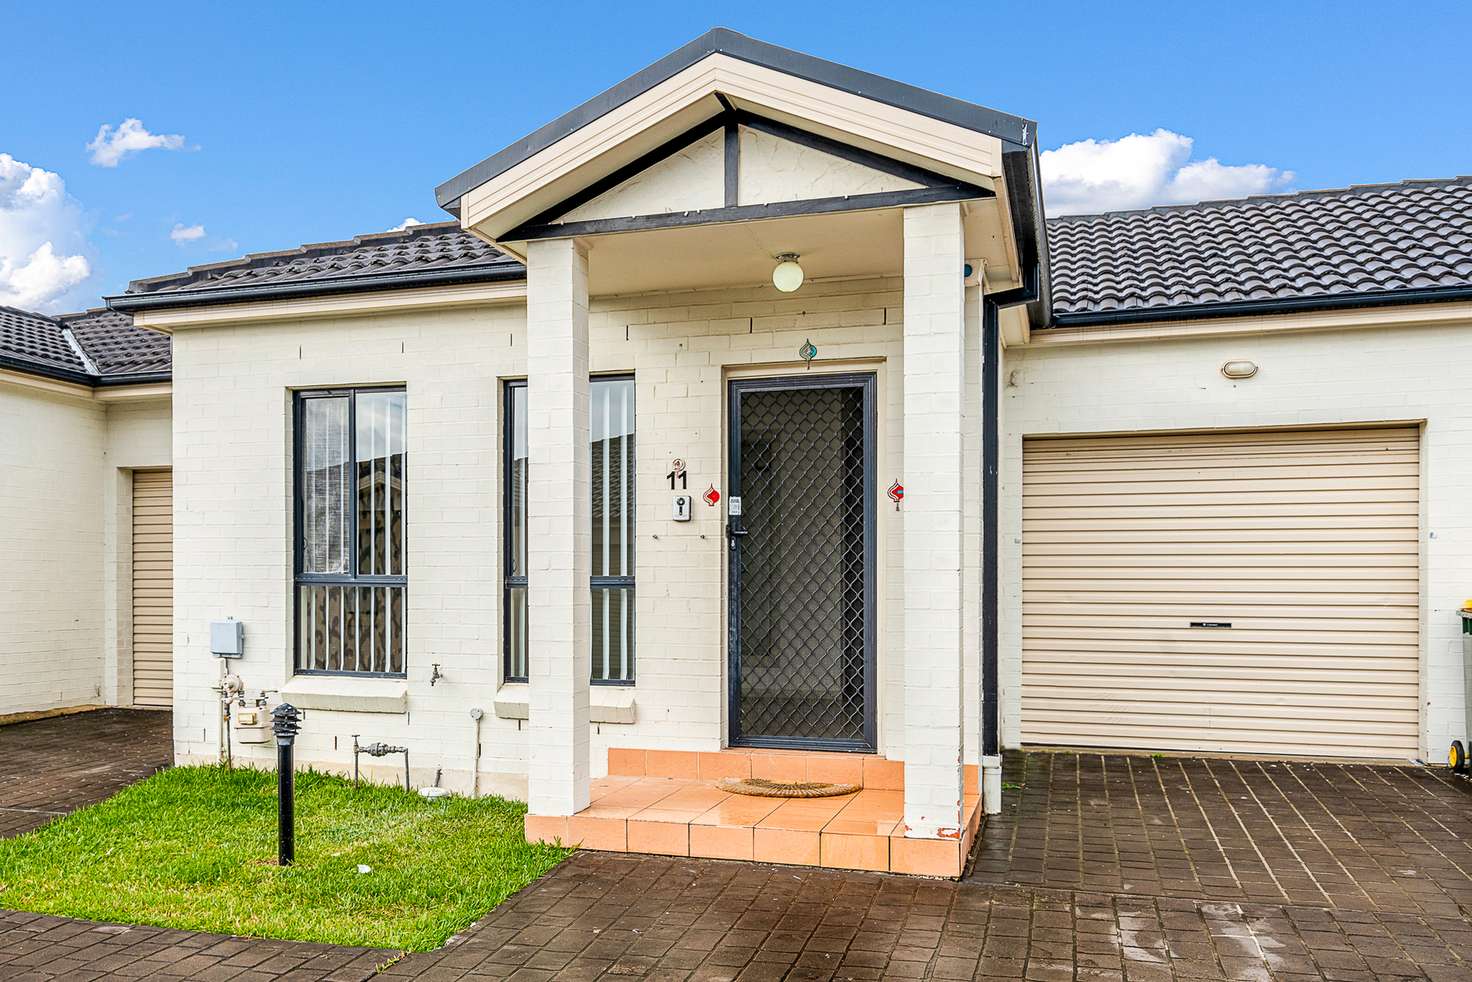 Main view of Homely villa listing, 11/41 Doonside Crescent, Blacktown NSW 2148